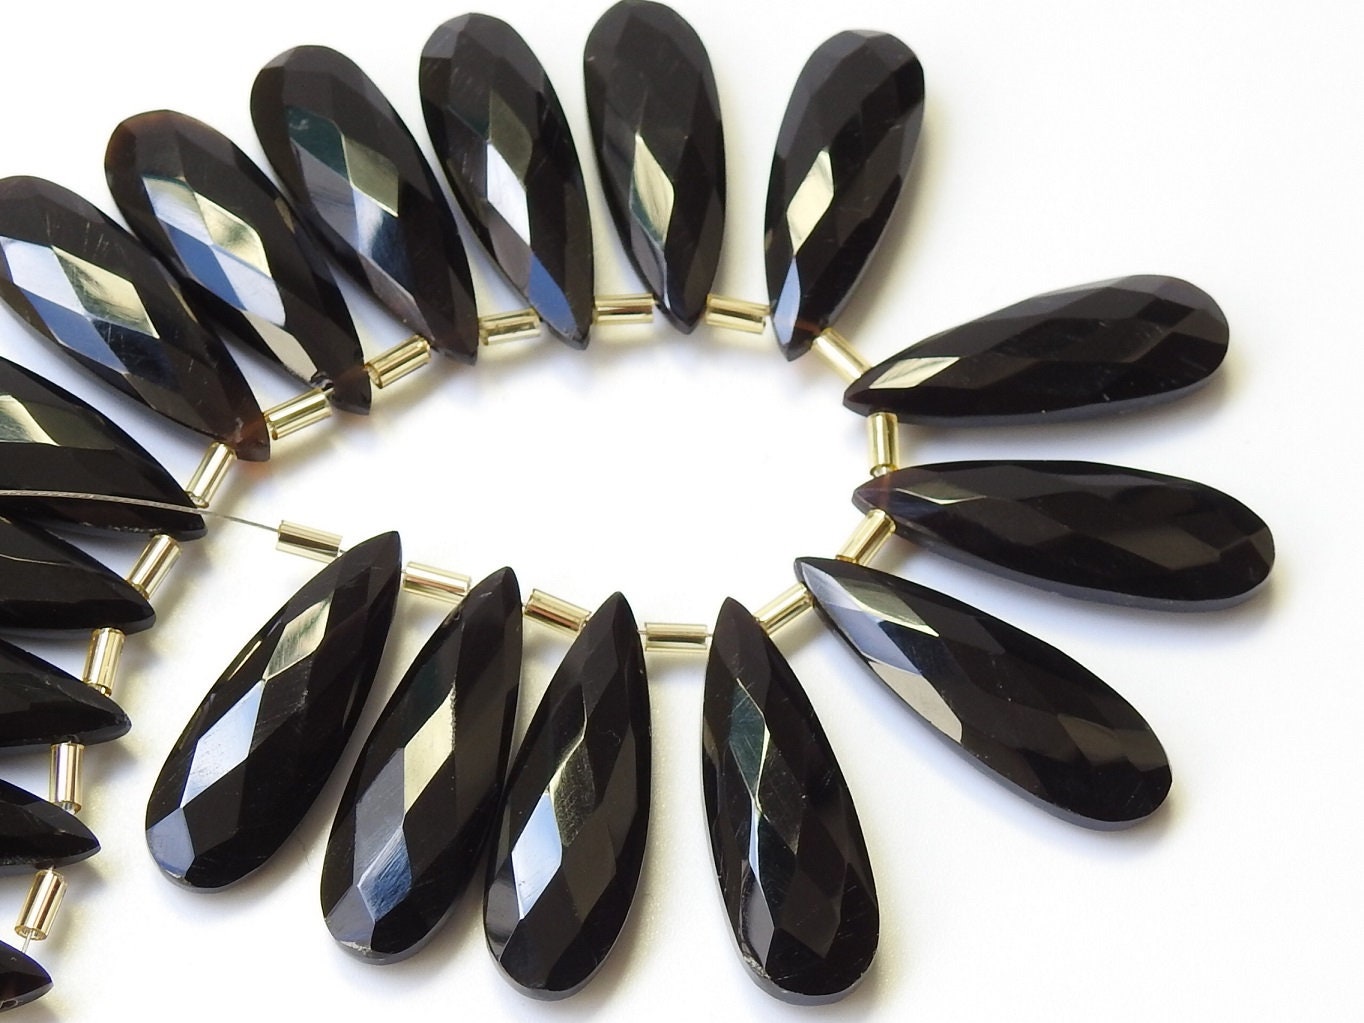 30X10MM Pair,Black Onyx Faceted Teardrop,Long Drop,Handmade,For Making Jewelry,Earrings,Wholesale Price,New Arrival (pme)CY2 | Save 33% - Rajasthan Living 17